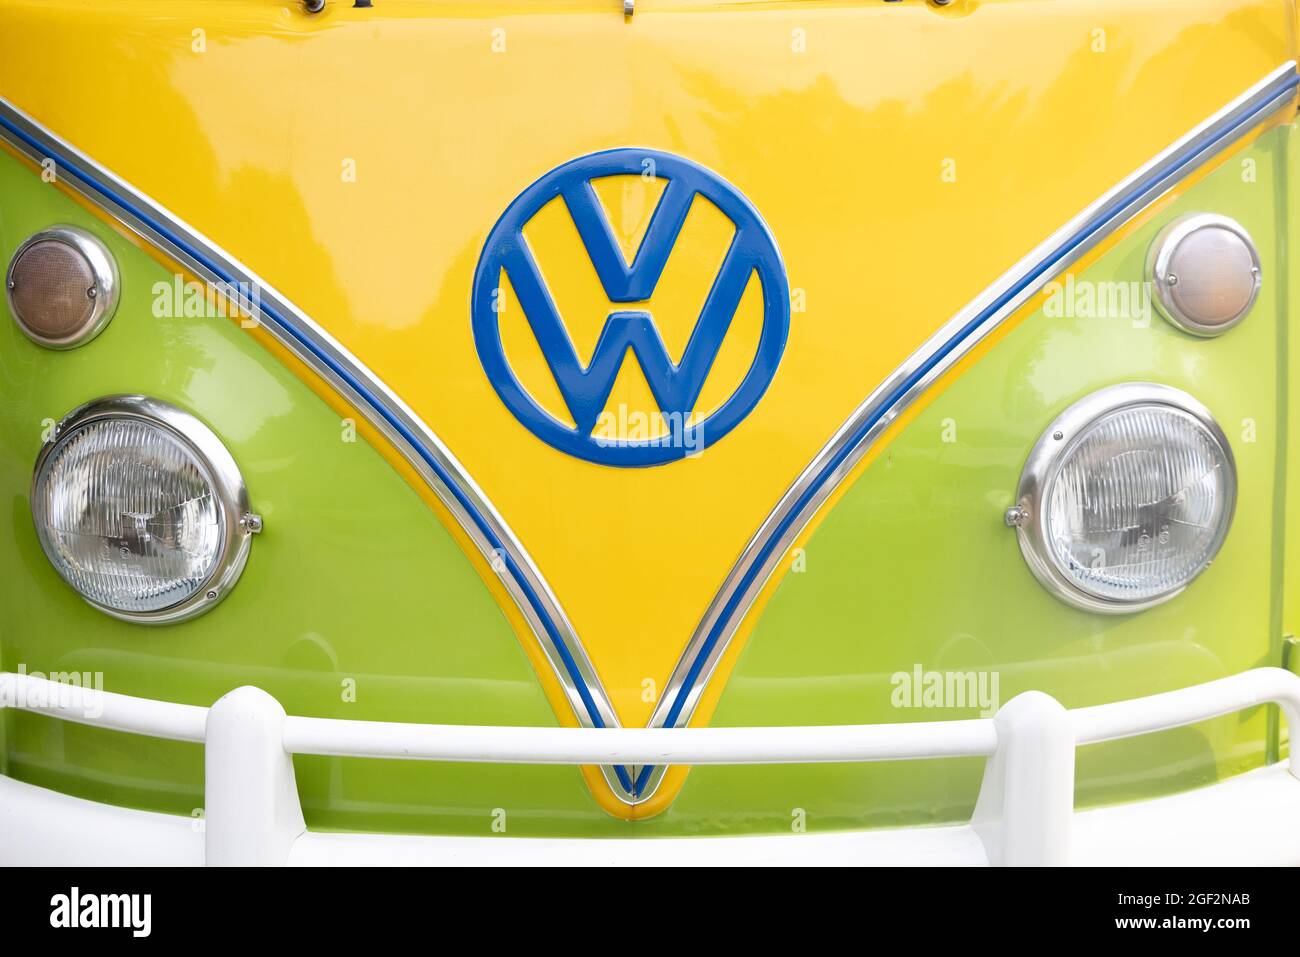 21-08-2021 Brasschaat, Antwerp, Belgium the front of a green and yellow vintage VW or Vokswagen camper van in the colors of Brazil, or reggae. High quality photo Stock Photo